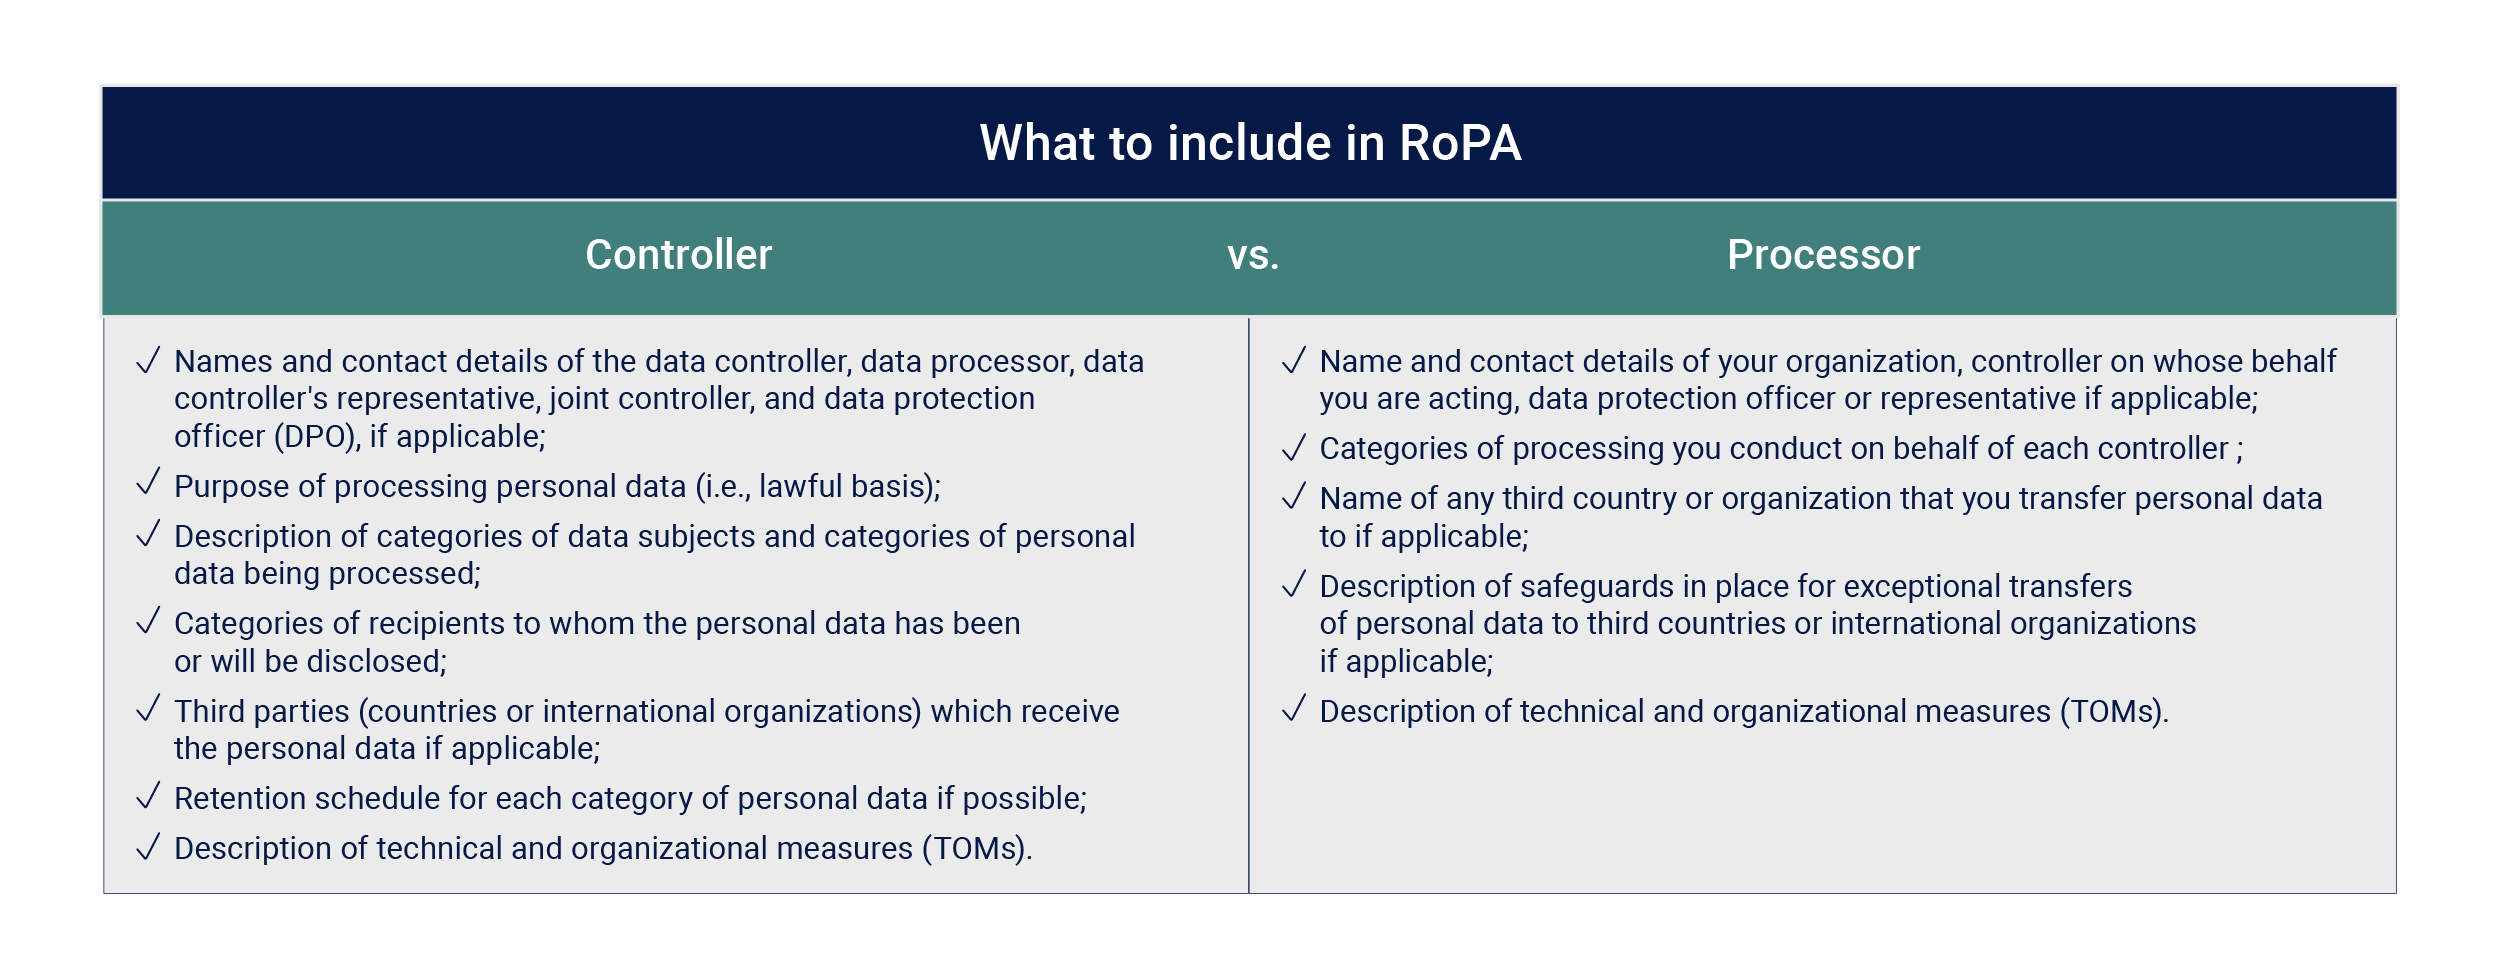 GDPR compliance requirements